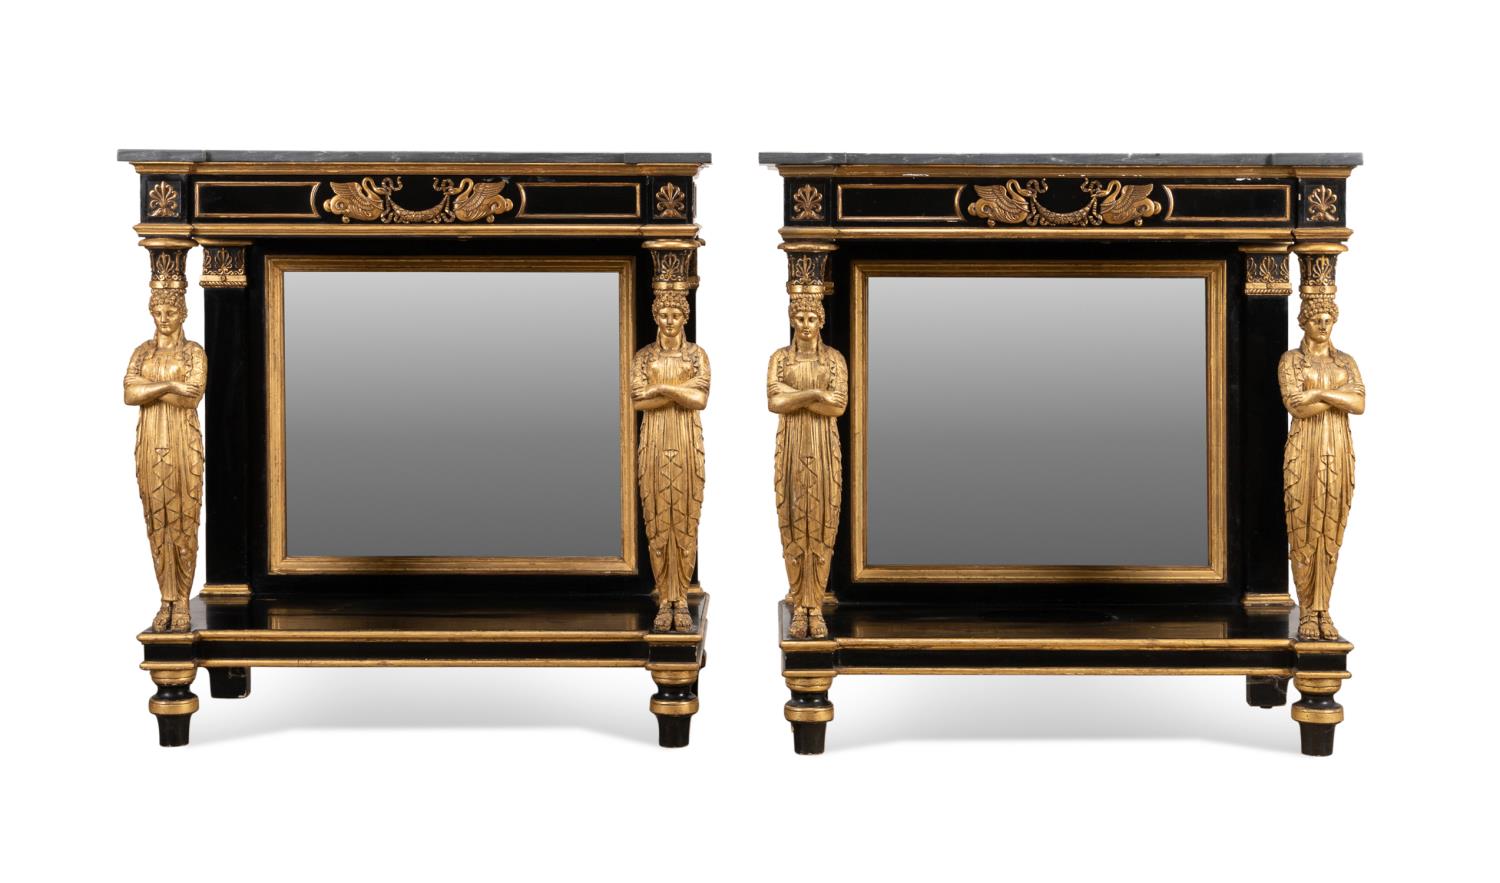 PR EMPIRE STYLE GILTWOOD MARBLE 3b4006